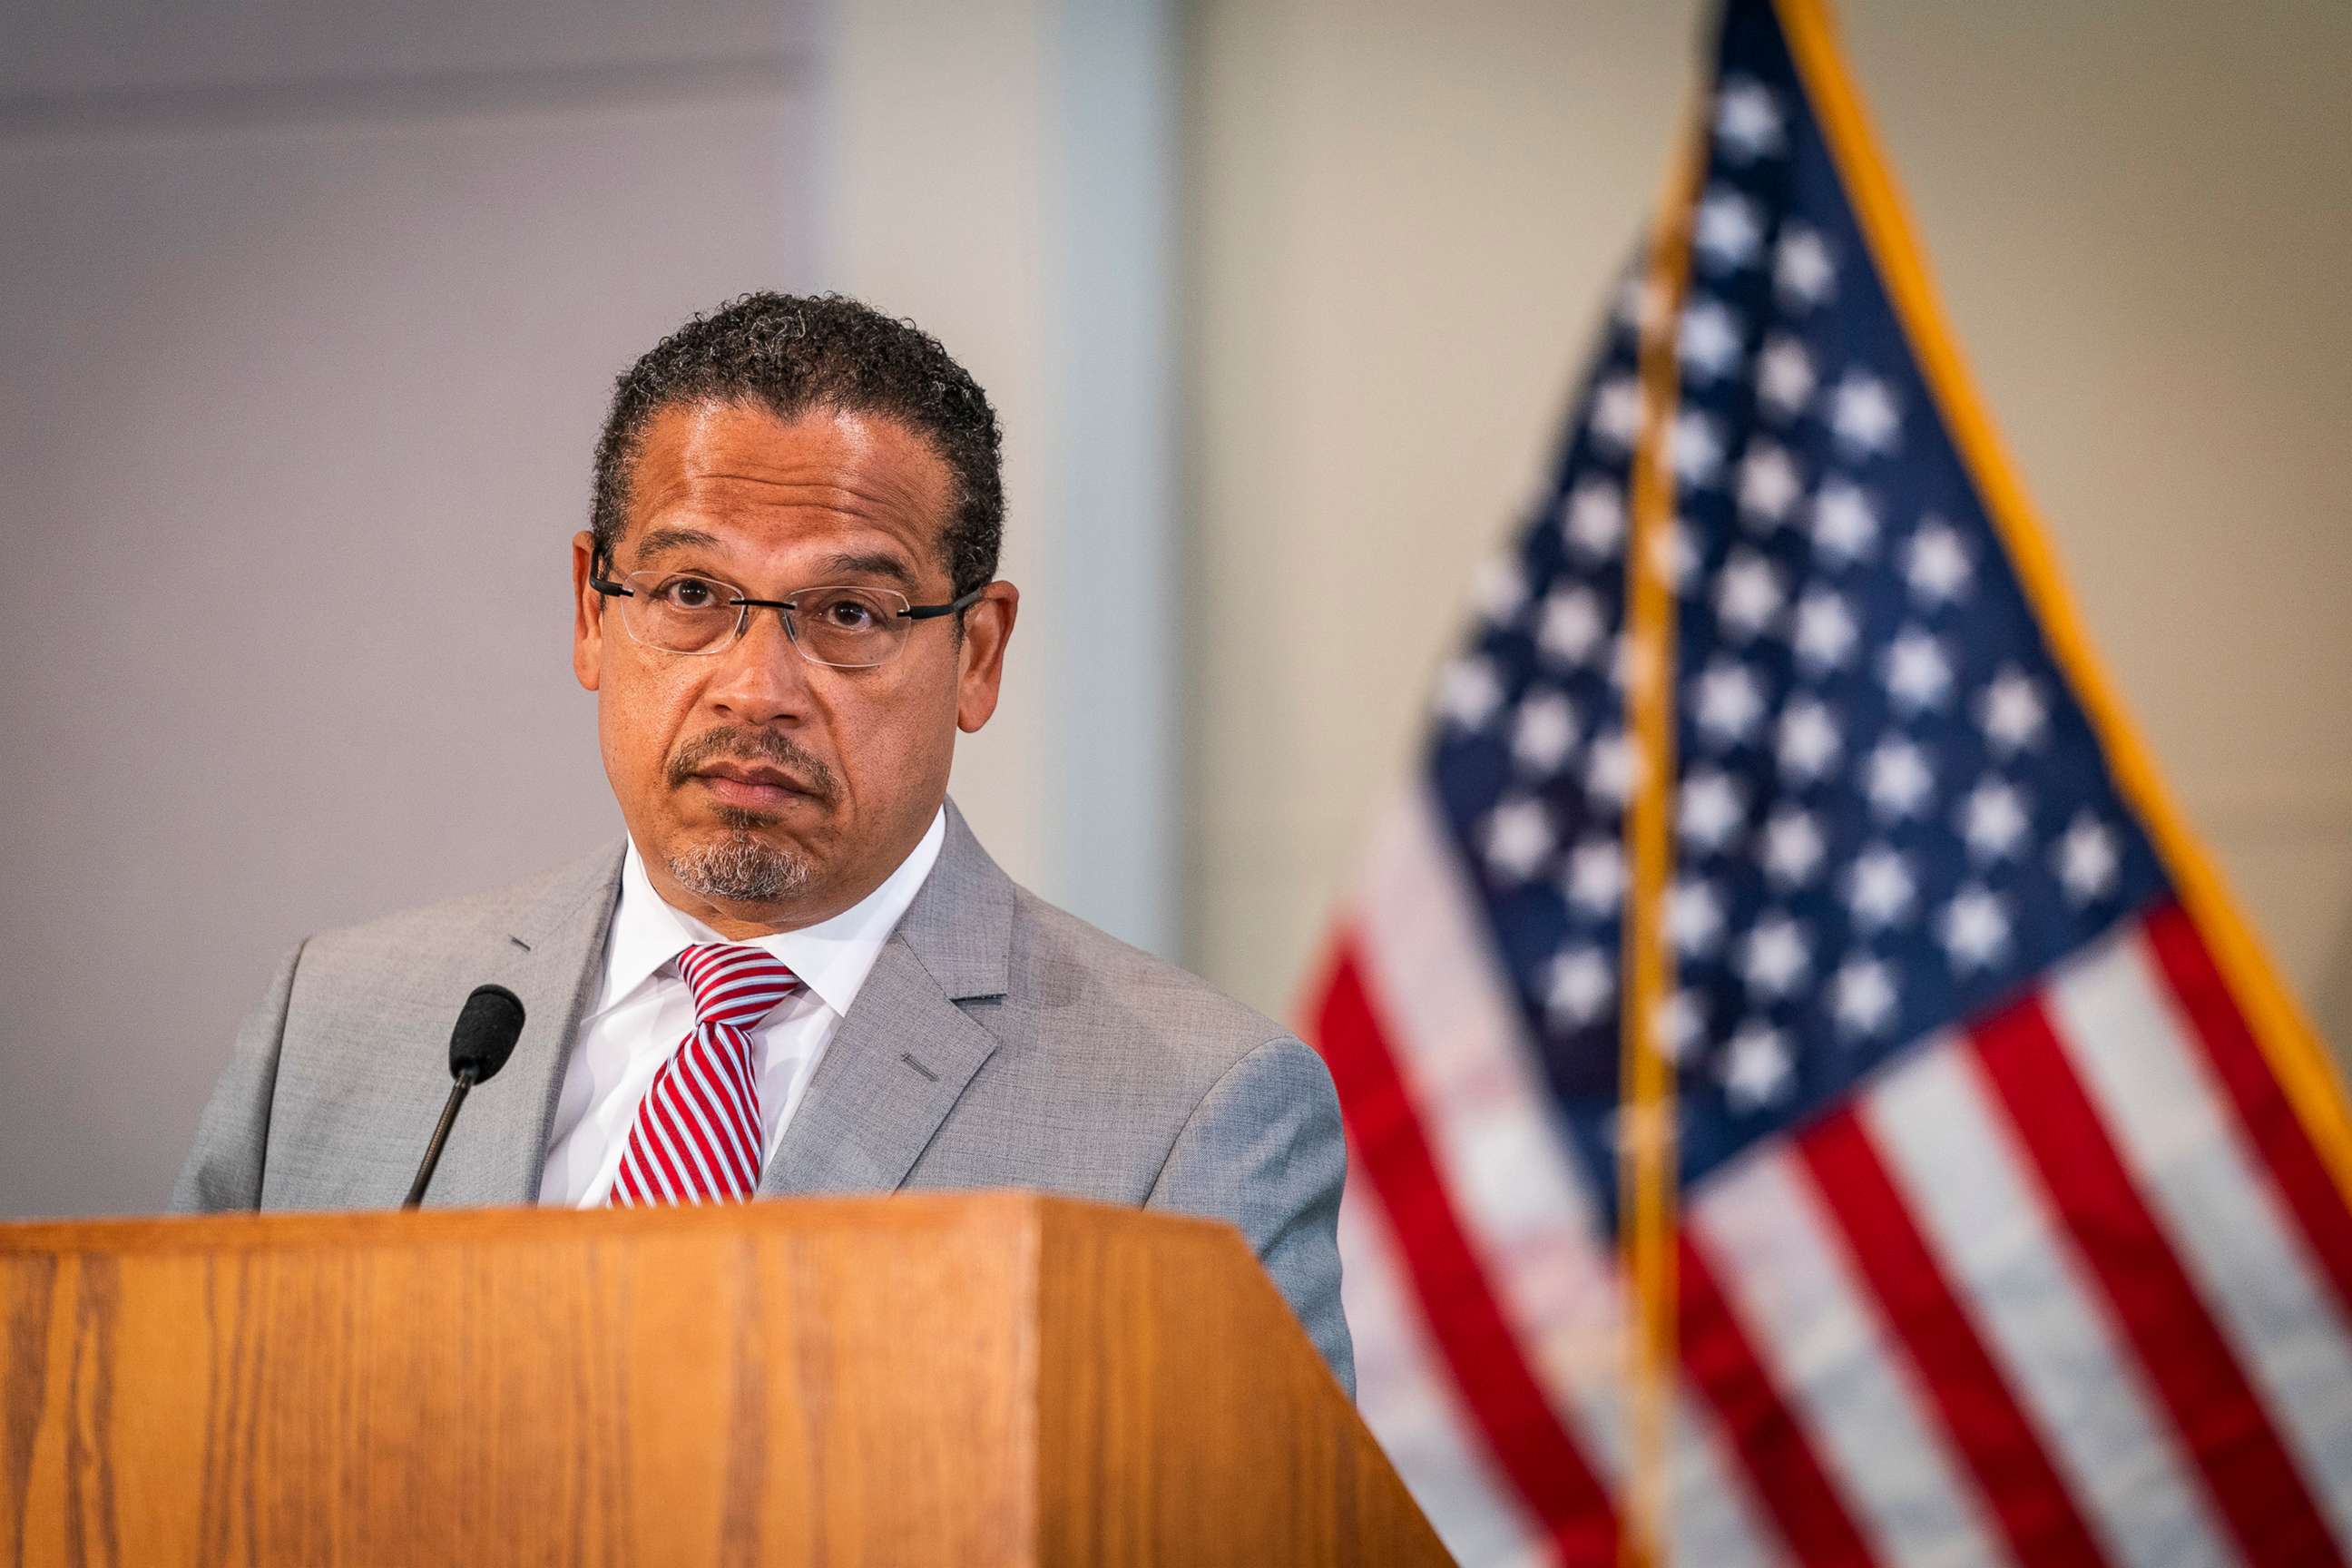 PHOTO: Minnesota Attorney General Keith Ellison speaks during a news conference at the Minnesota Department of Revenue, on June 3, 2020, in St. Paul, Minn.